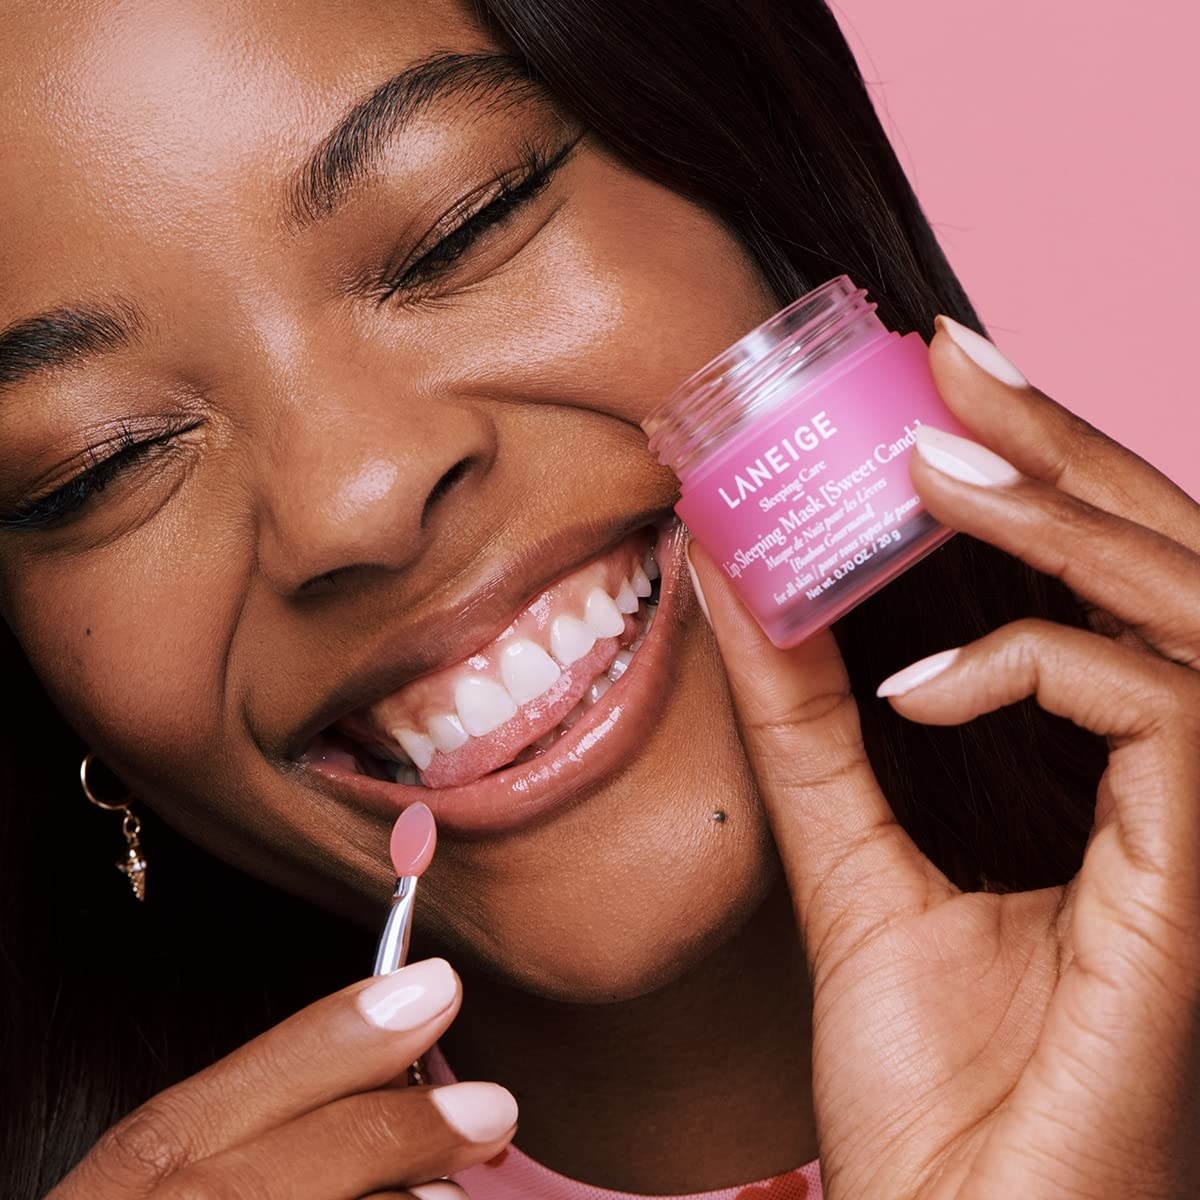 model holding the jar of product and smiling applying the lip mask to their lips with an applicator